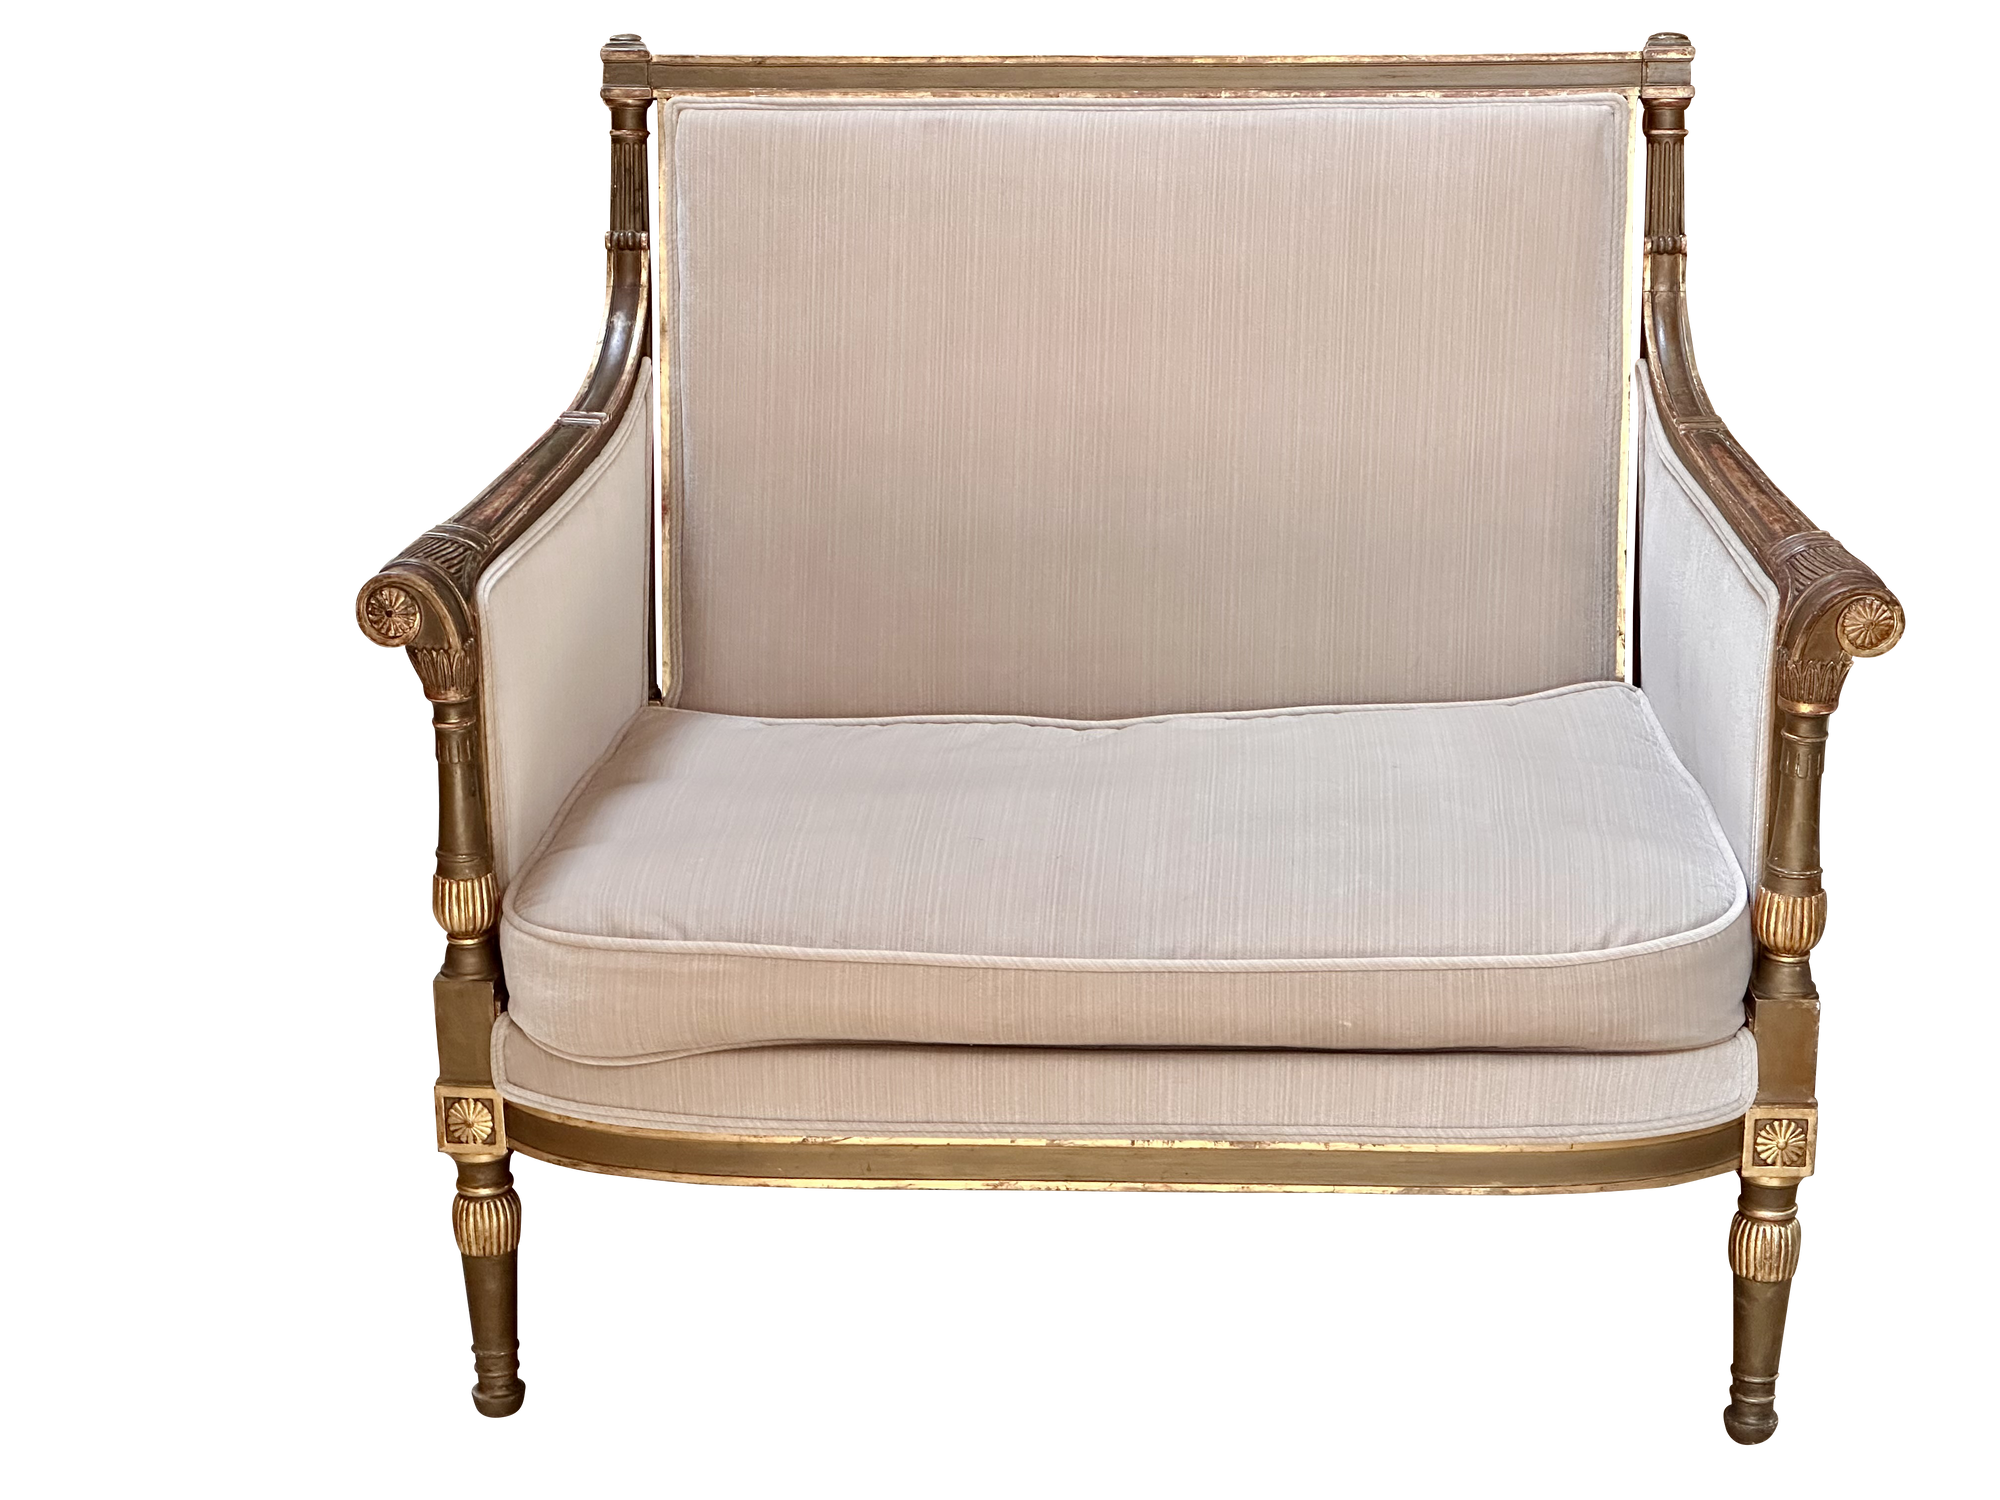 19th-Early 20th Century Italian Neoclassical Bergere Armchair